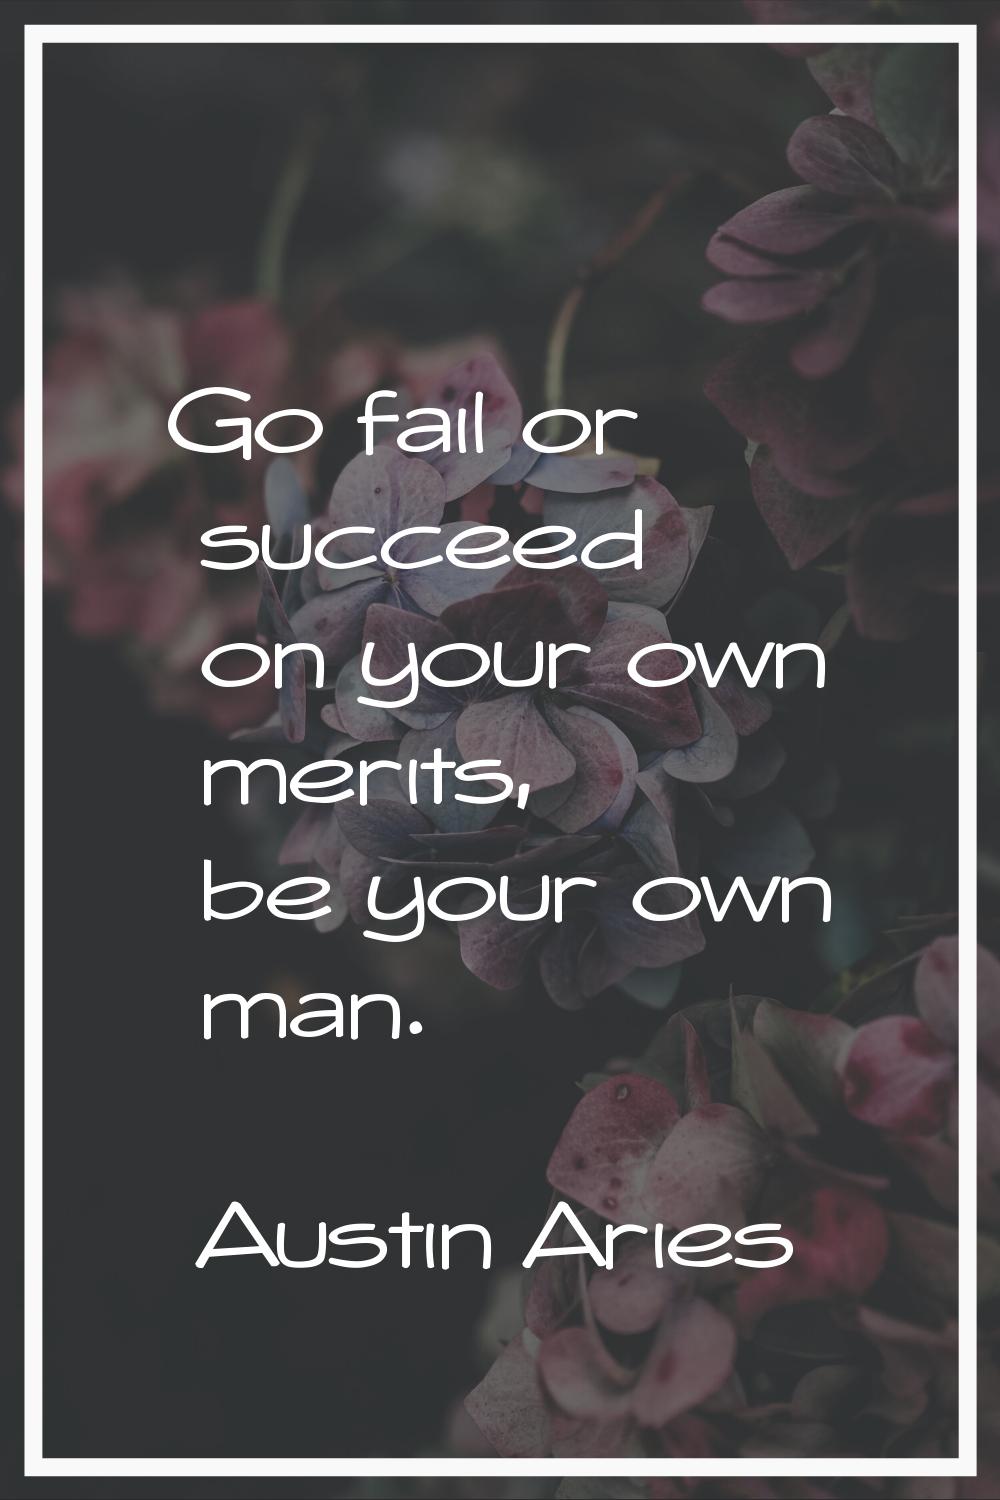 Go fail or succeed on your own merits, be your own man.